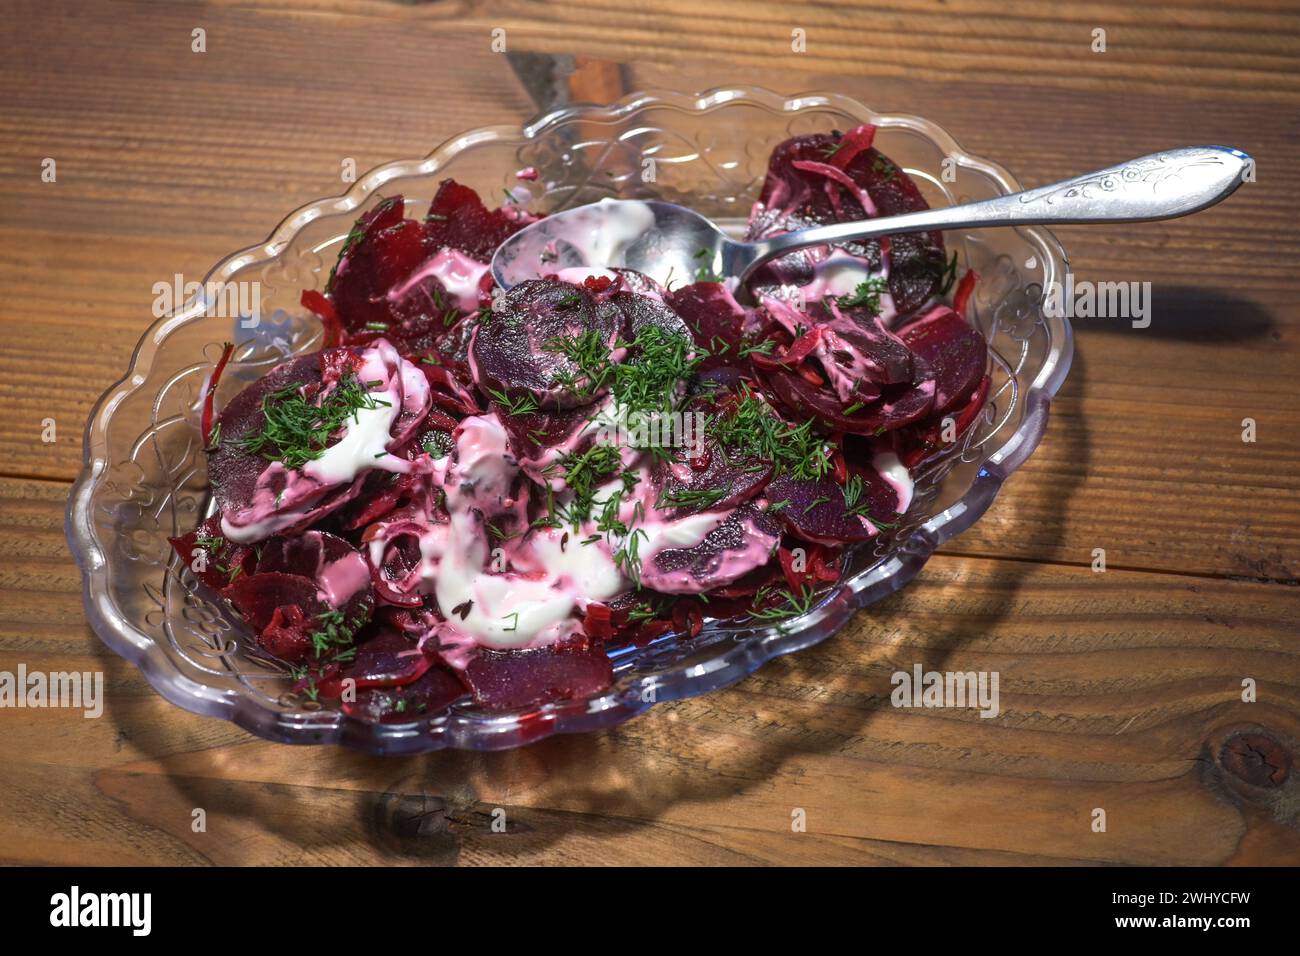 Beetroot salad with dill and a creamy dressing, healthy vegetarian dish in a glass bowl on a rustic wooden table, selected focus Stock Photo